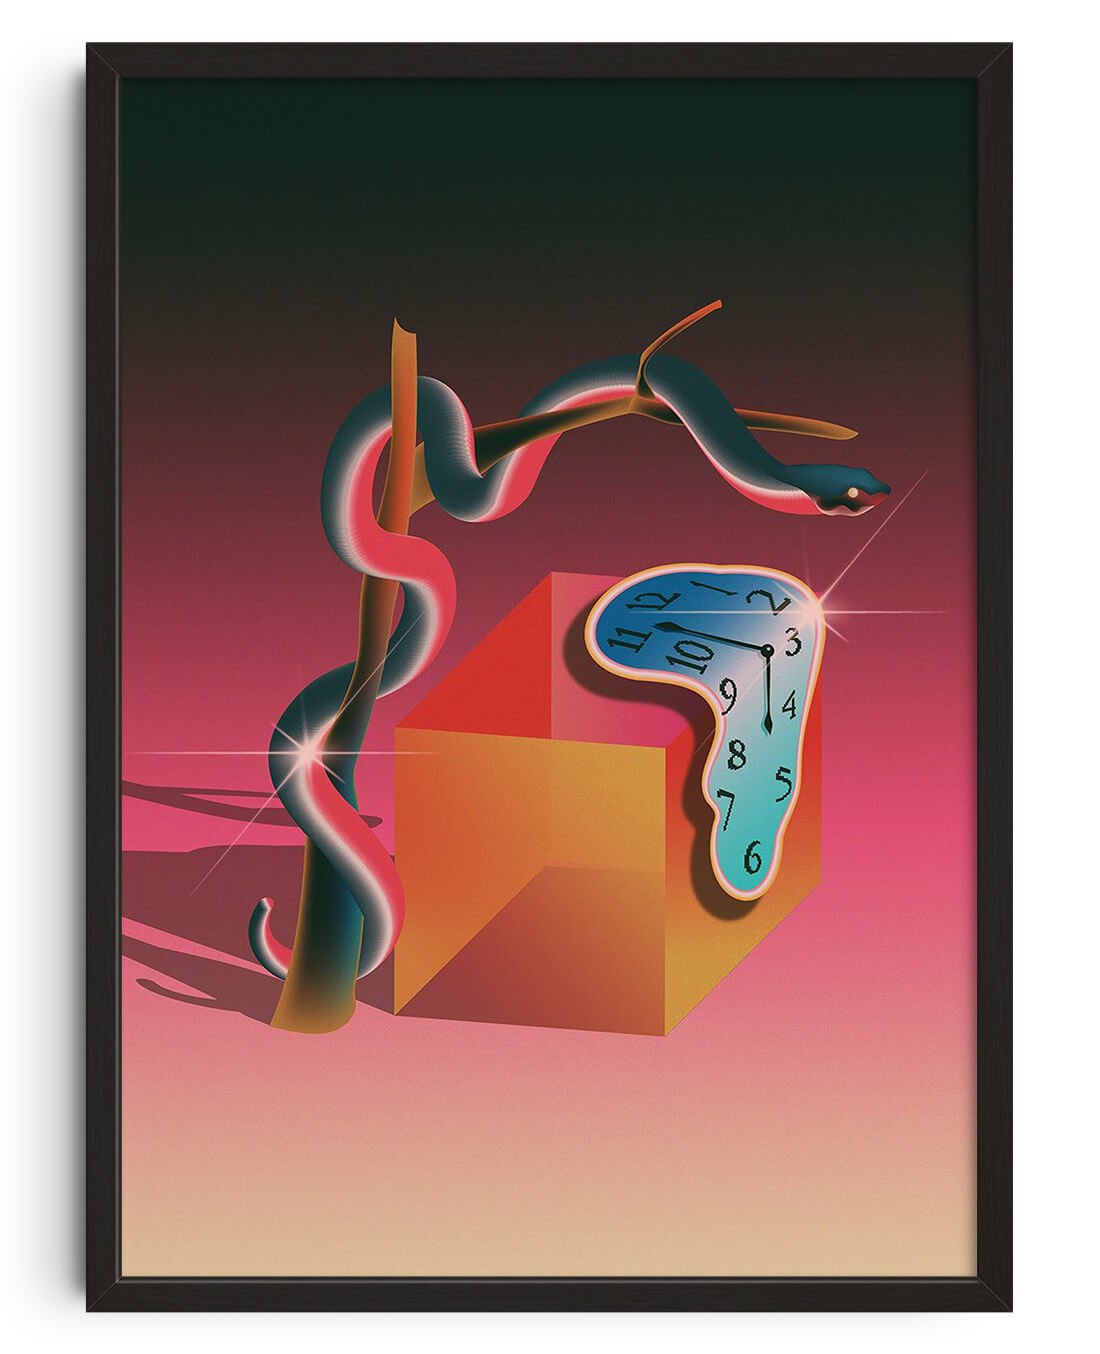 The Persistence of Pink contemporary wall art print by Paulina Almira - sold by DROOL